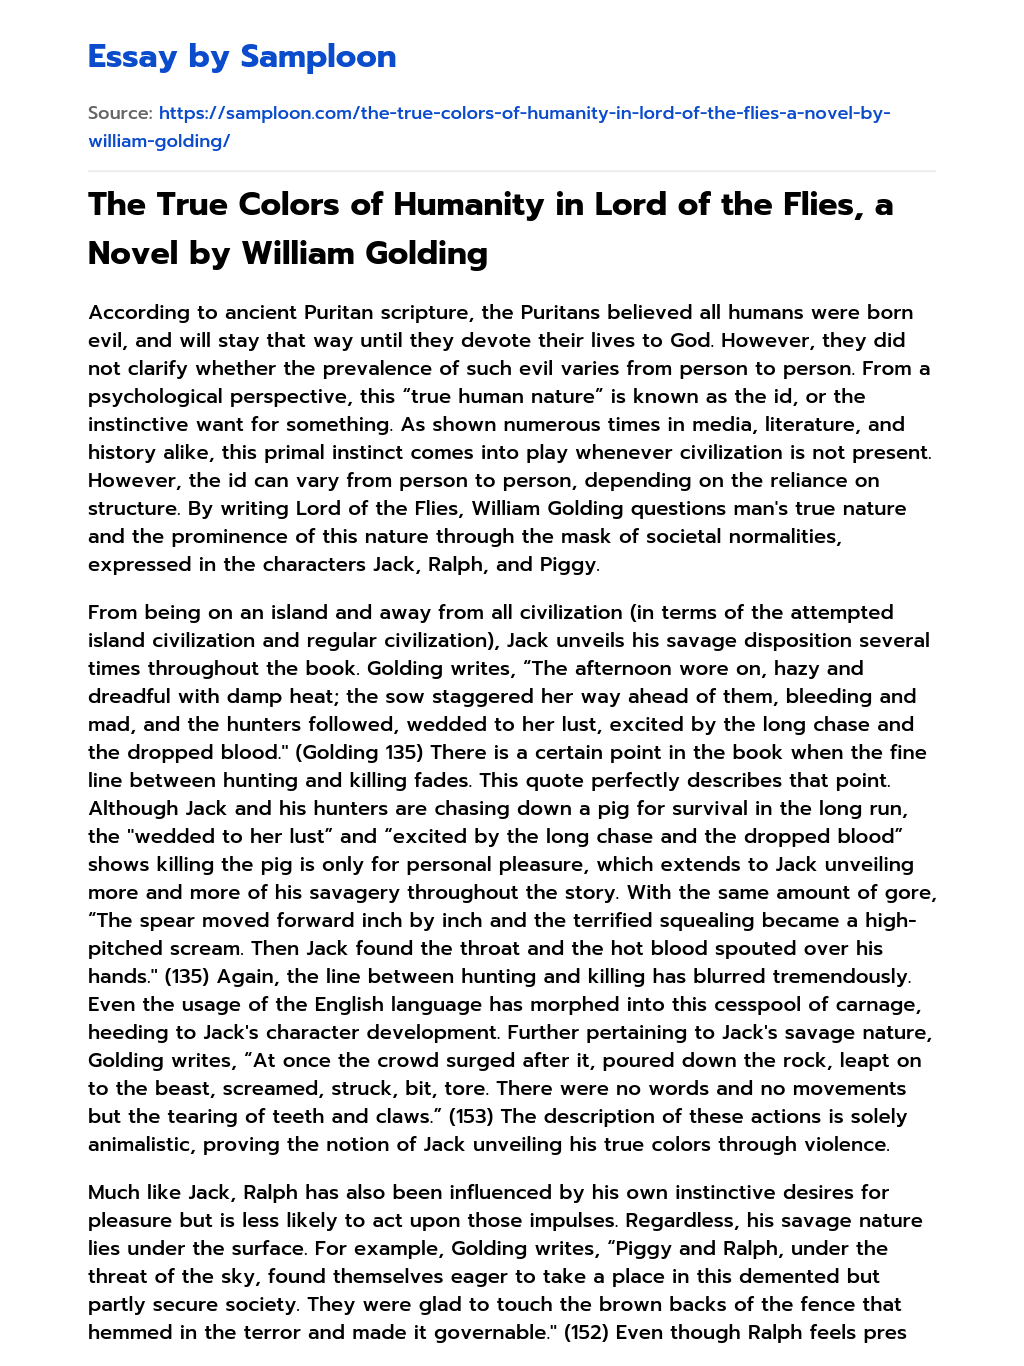 The True Colors of Humanity in Lord of the Flies, a Novel by William Golding essay